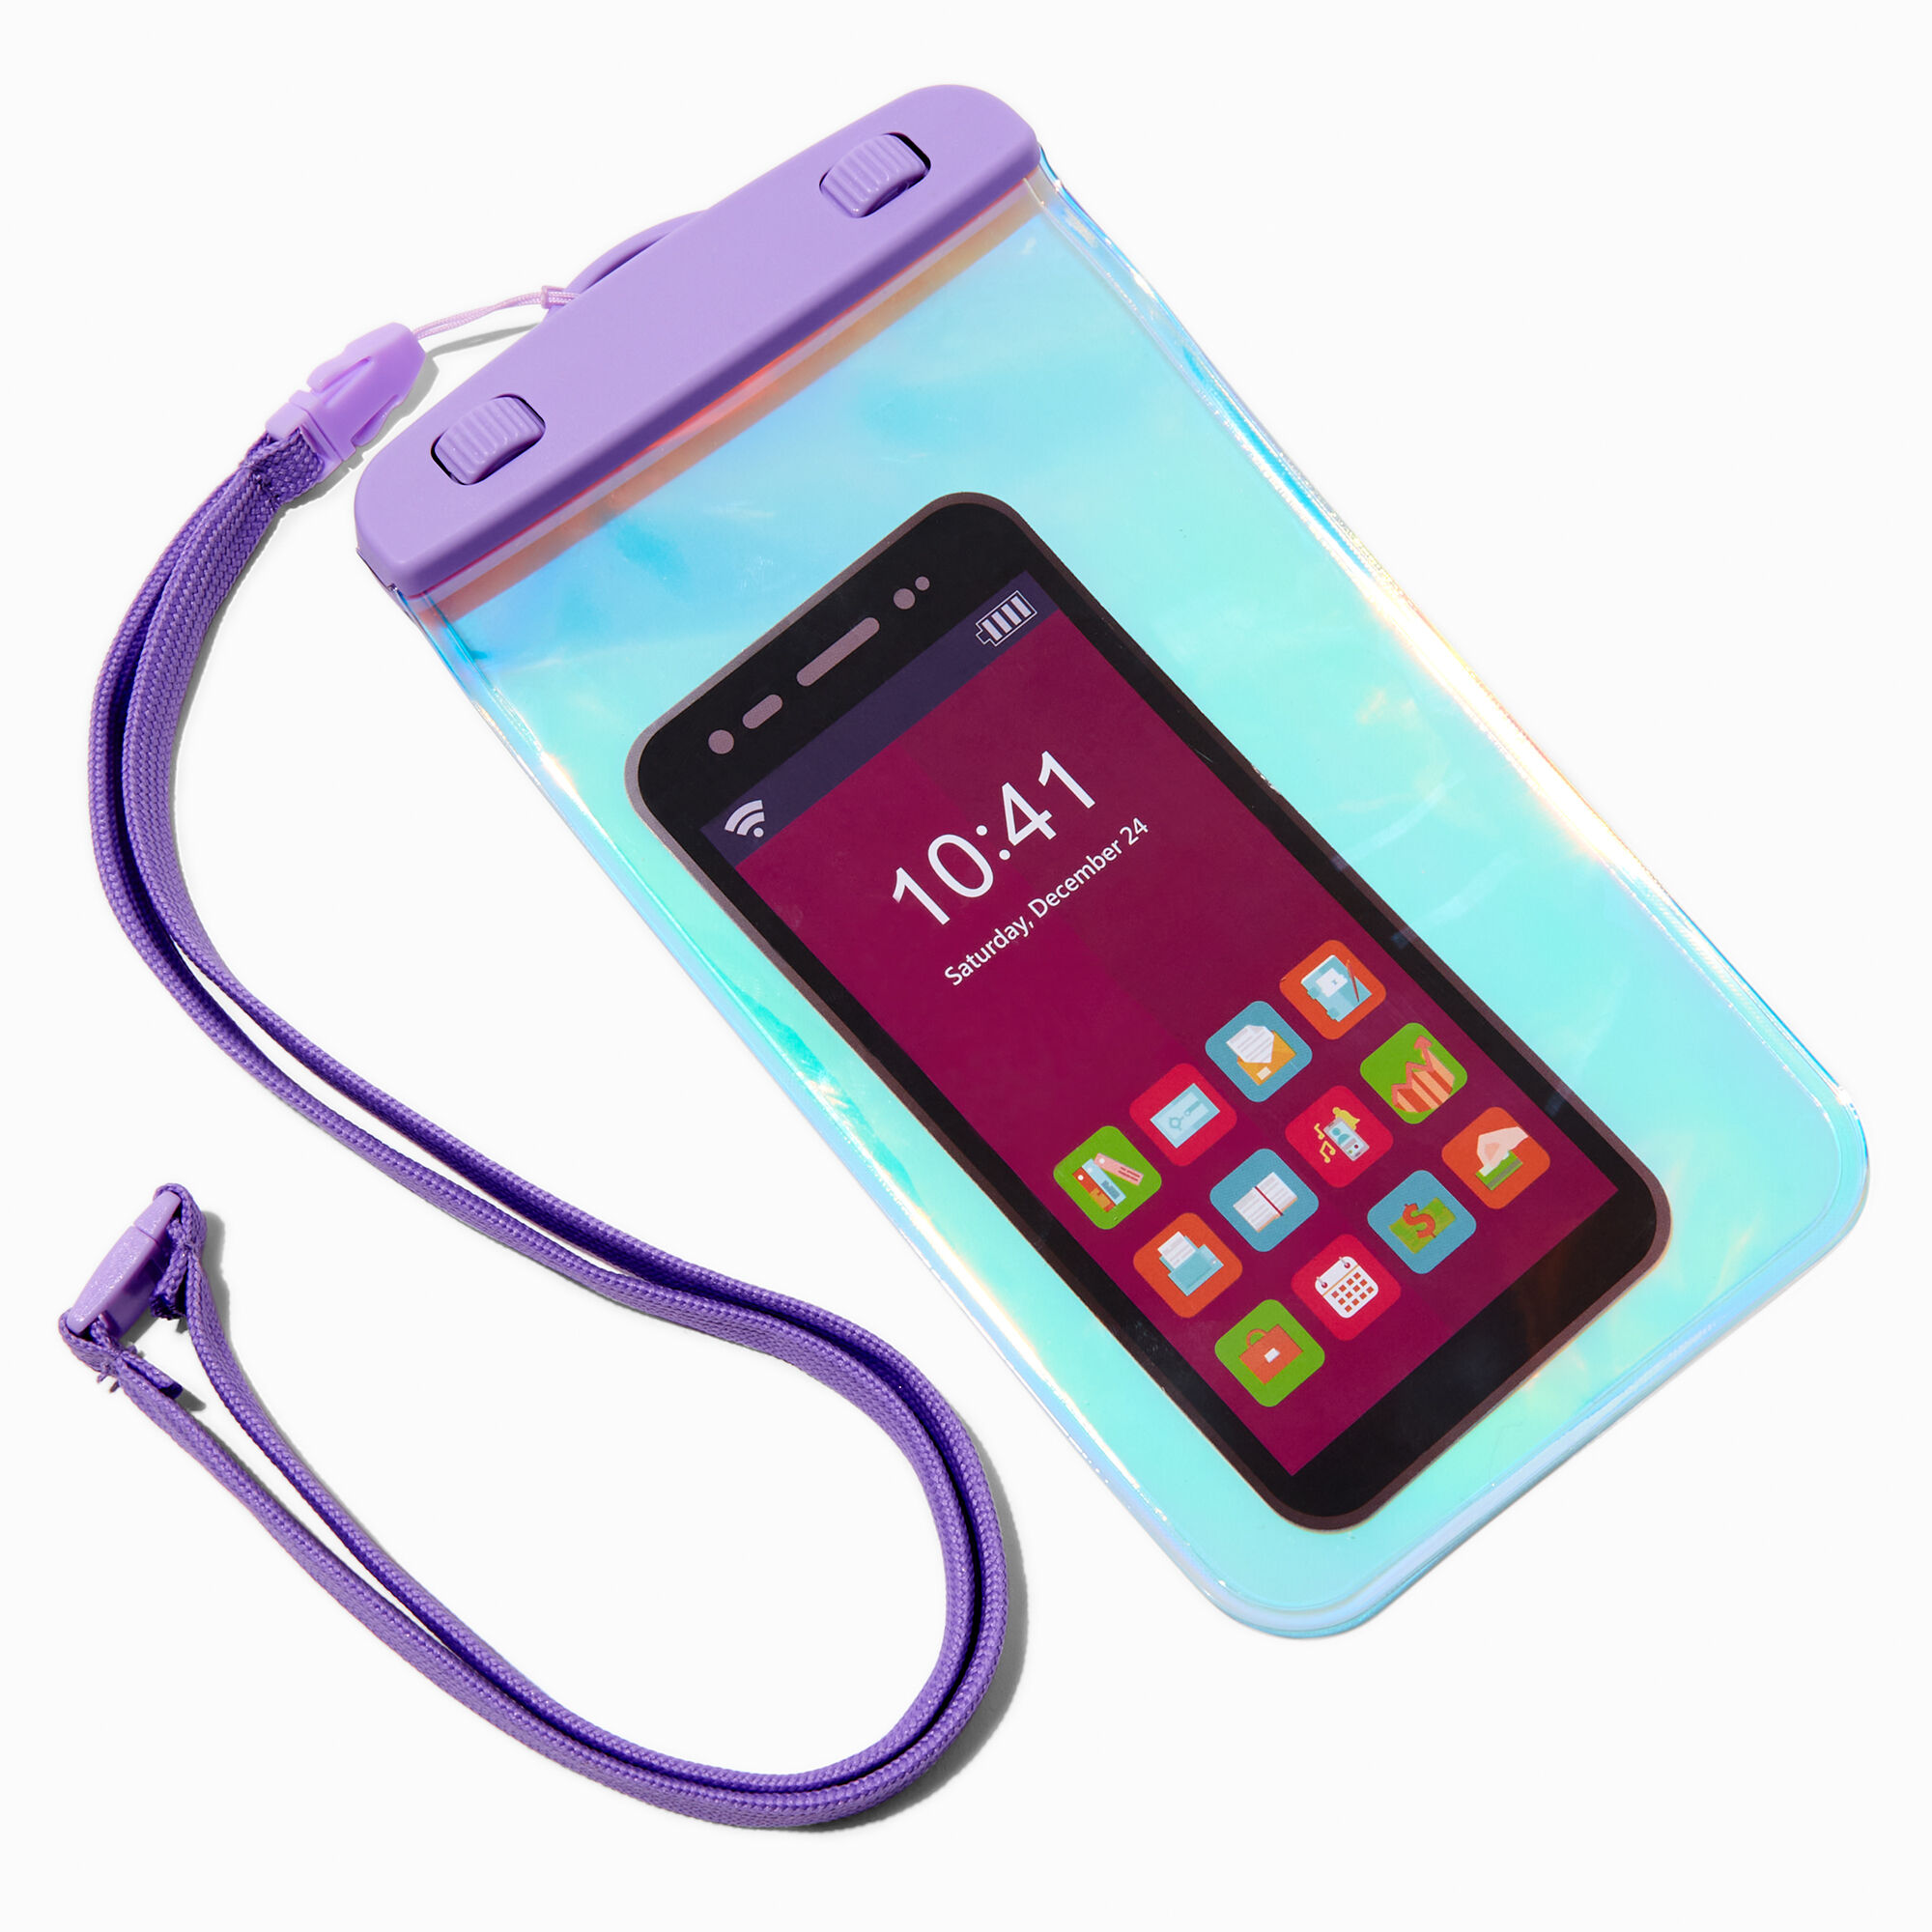 View Claires Waterproof Holographic Phone Pouch With Crossbody Strap information